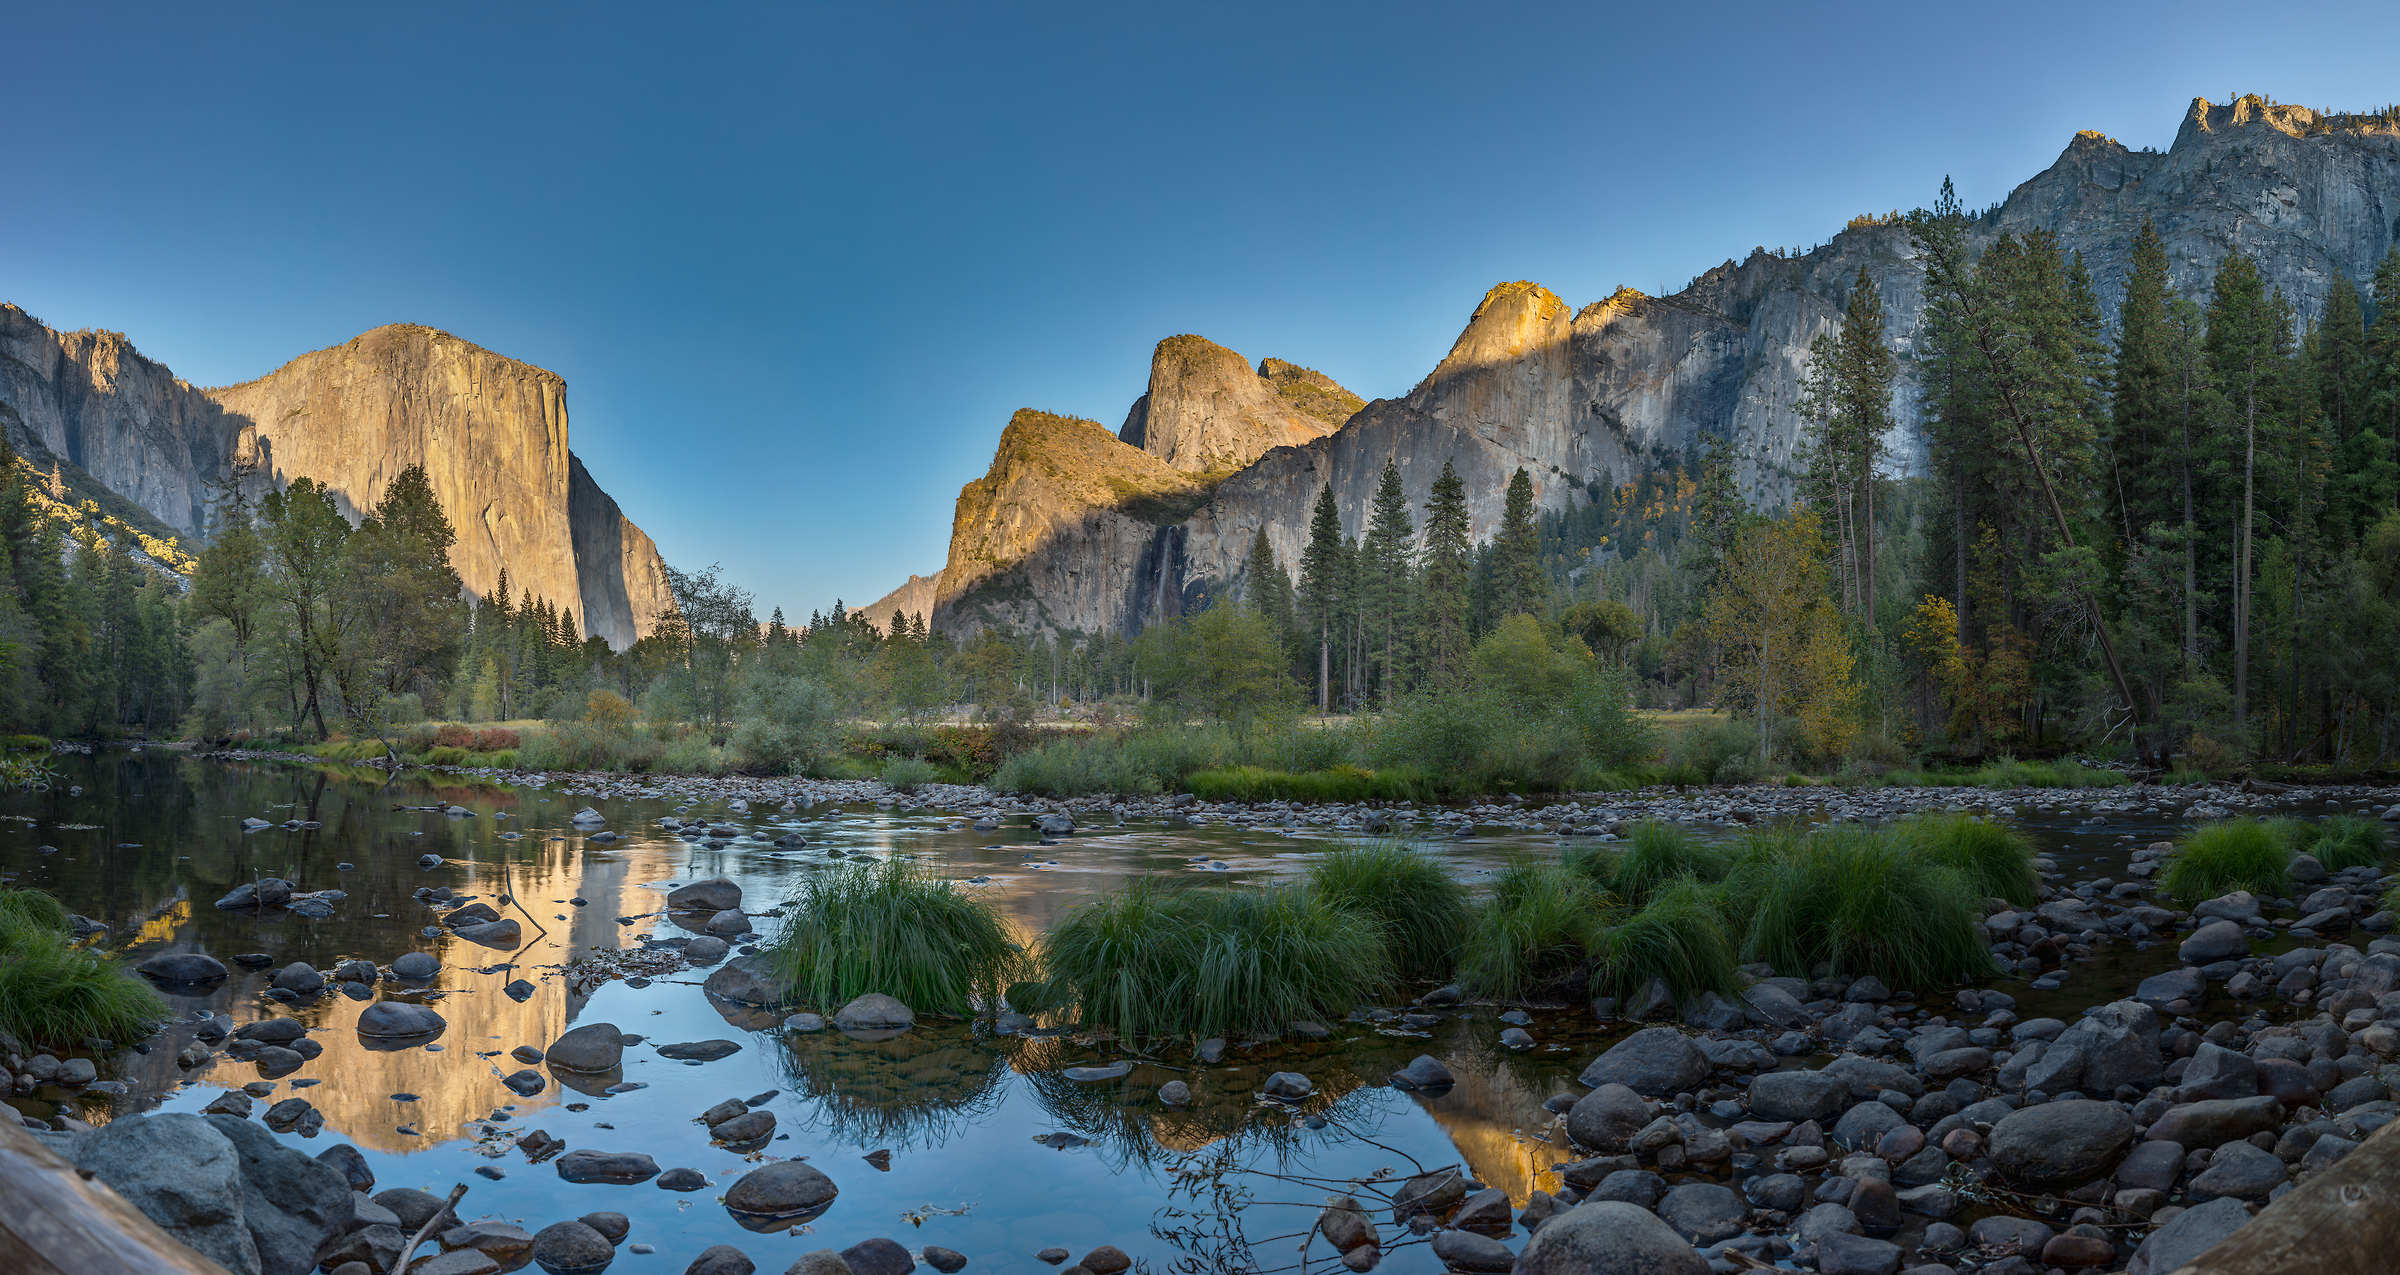 1,545 megapixels! A very high resolution, large-format VAST photo print of a river, trees, valley, and mountains; landscape photograph created by John Freeman in Valley View, Yosemite National Park, California.